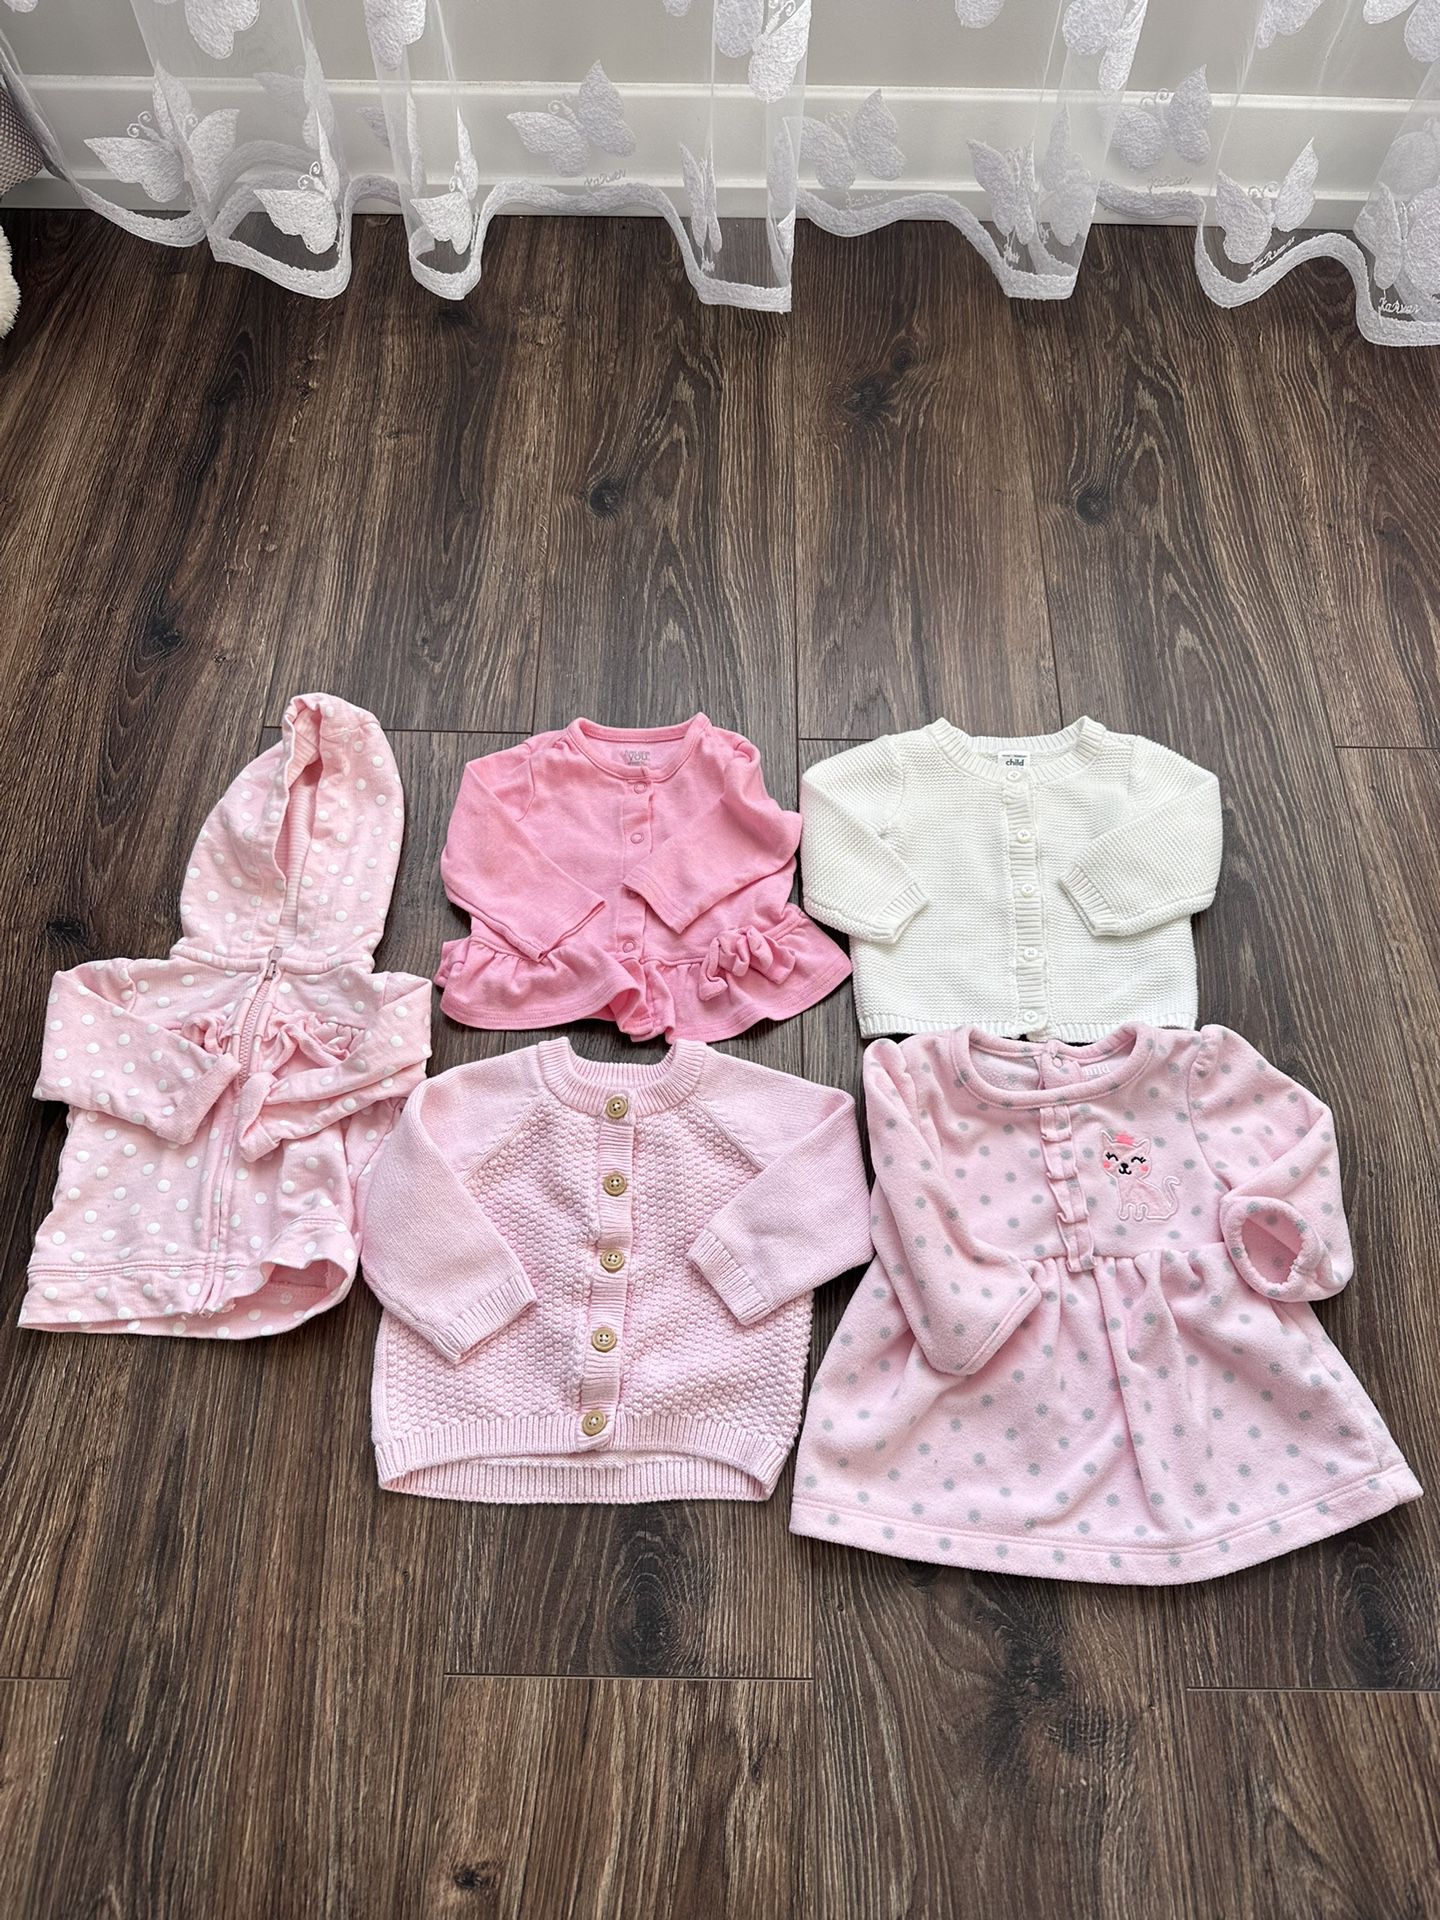 5pcs sweaters 3-6months old baby girl 